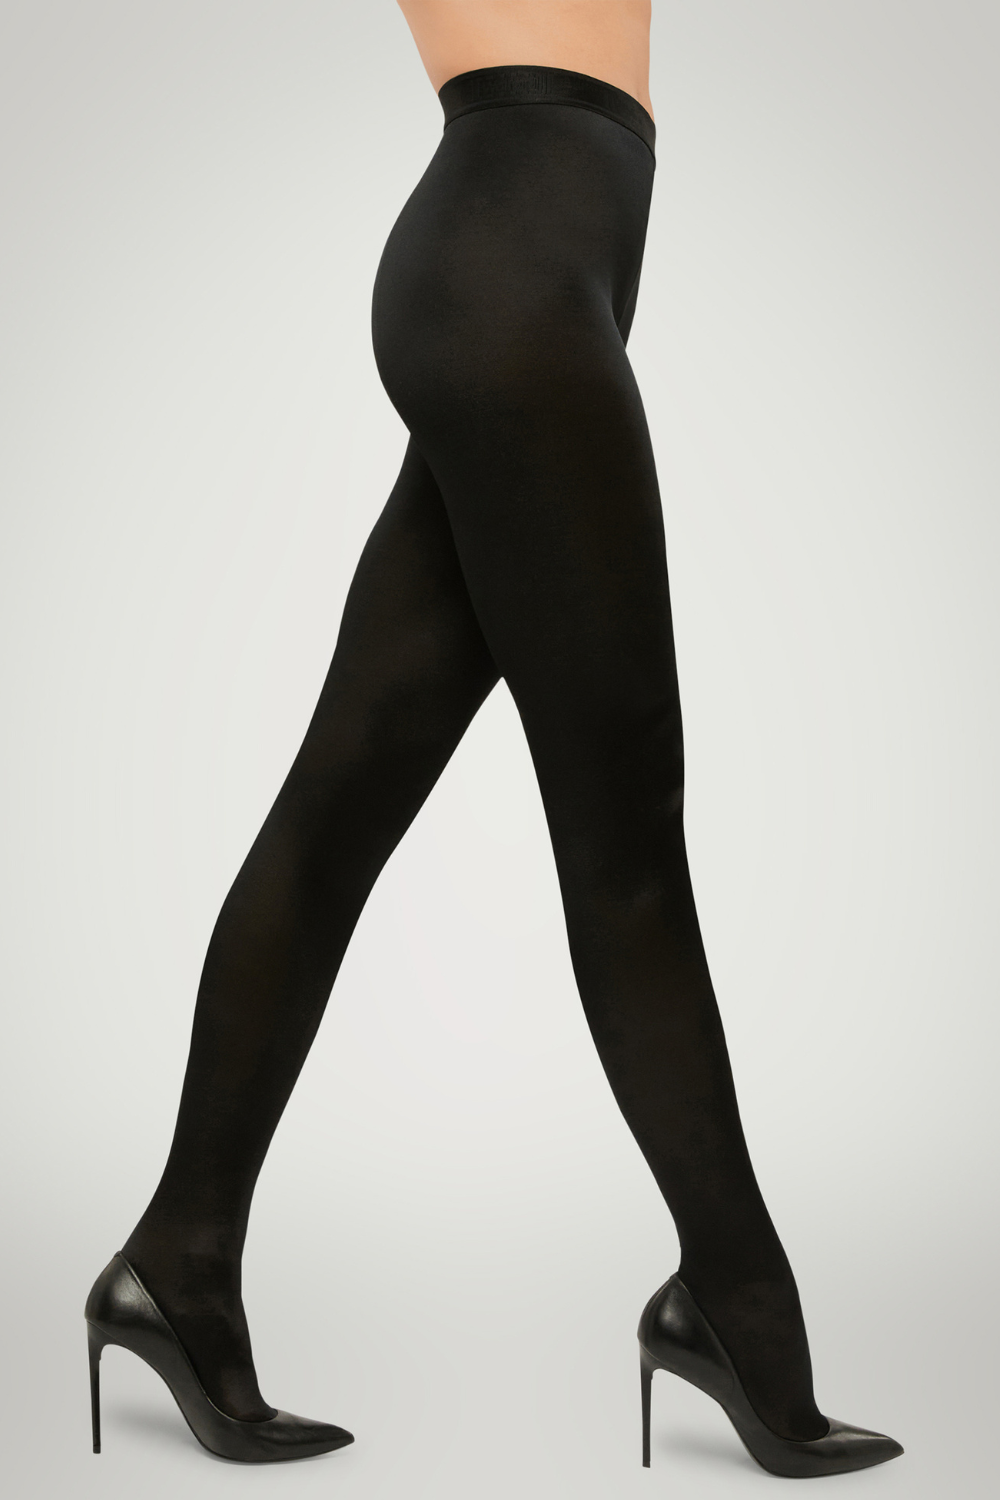 Wolford Satin de Luxe Tights – Naughty Knickers